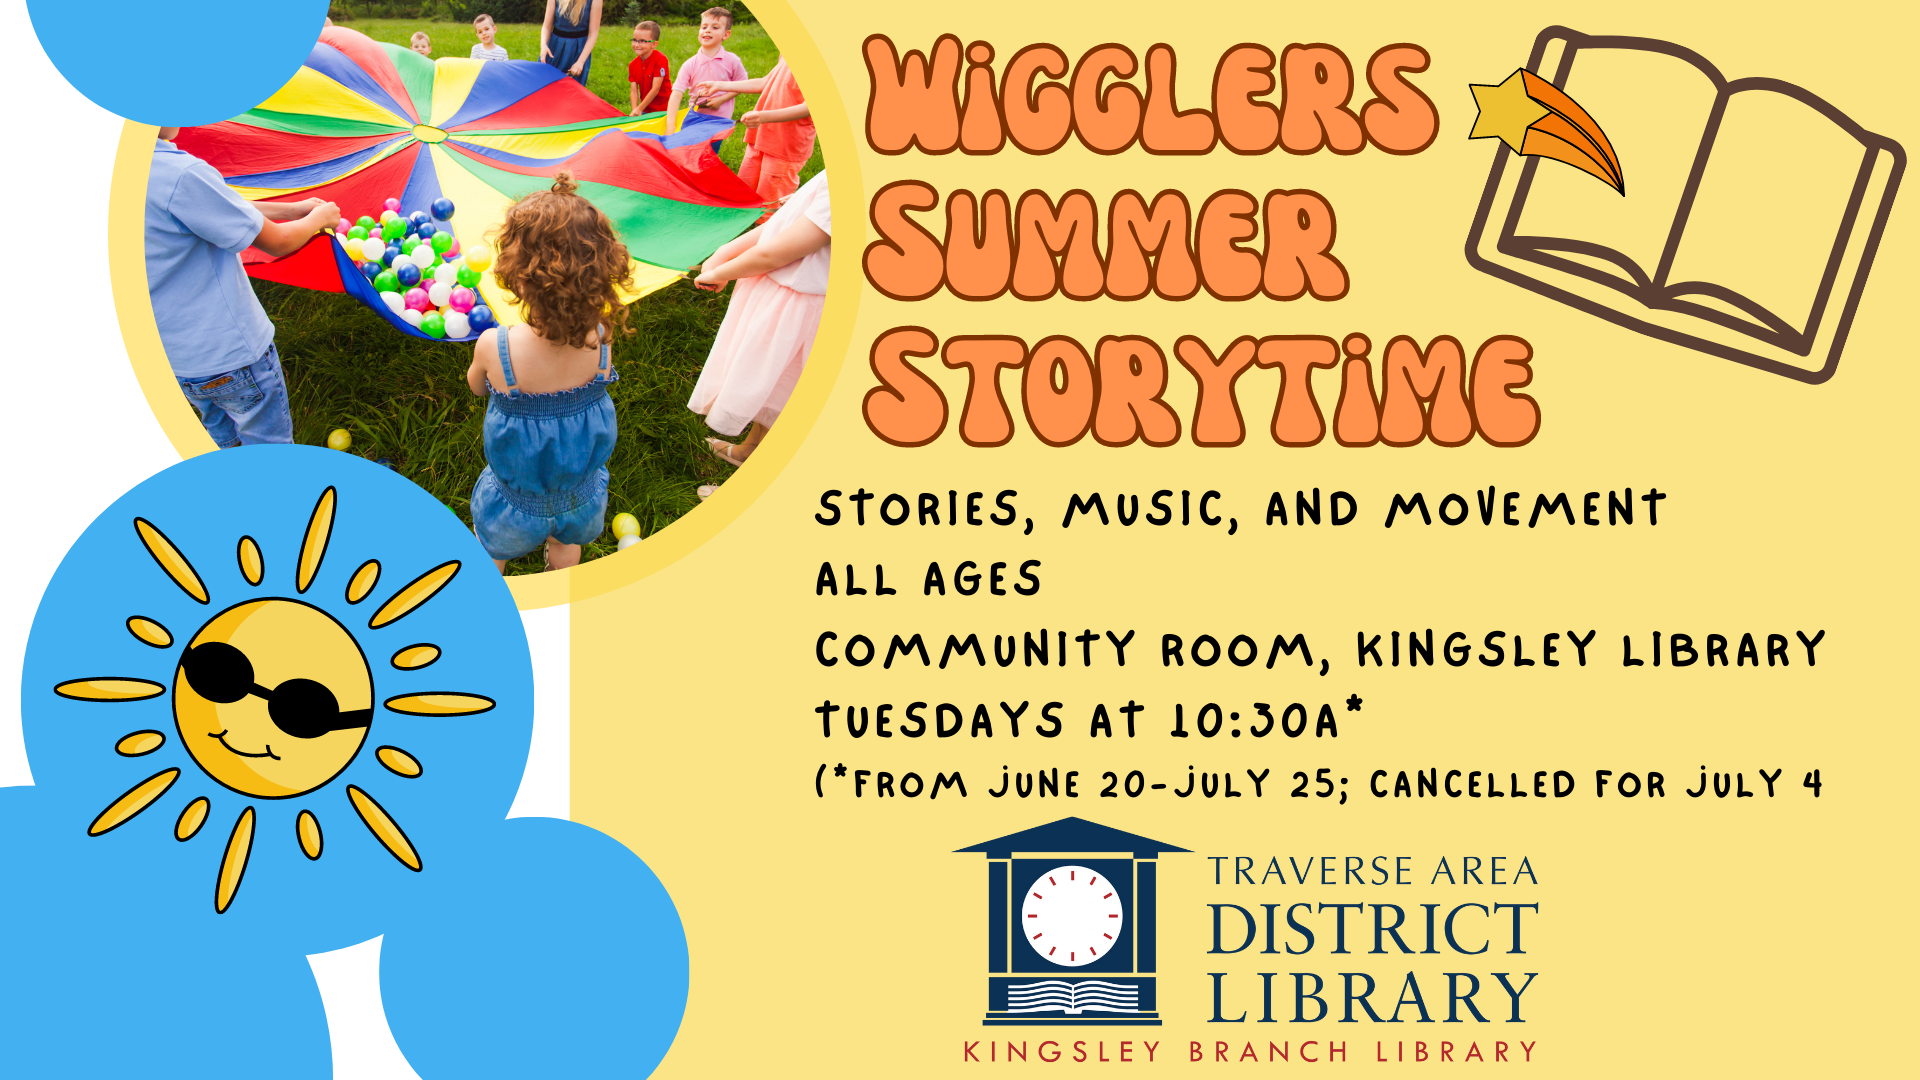 Image reads "Wigglers Summer Storytime," to the left of text is an image of the sun wearing sunglasses and an image of children playing with a multicolored parachute and soft balls.